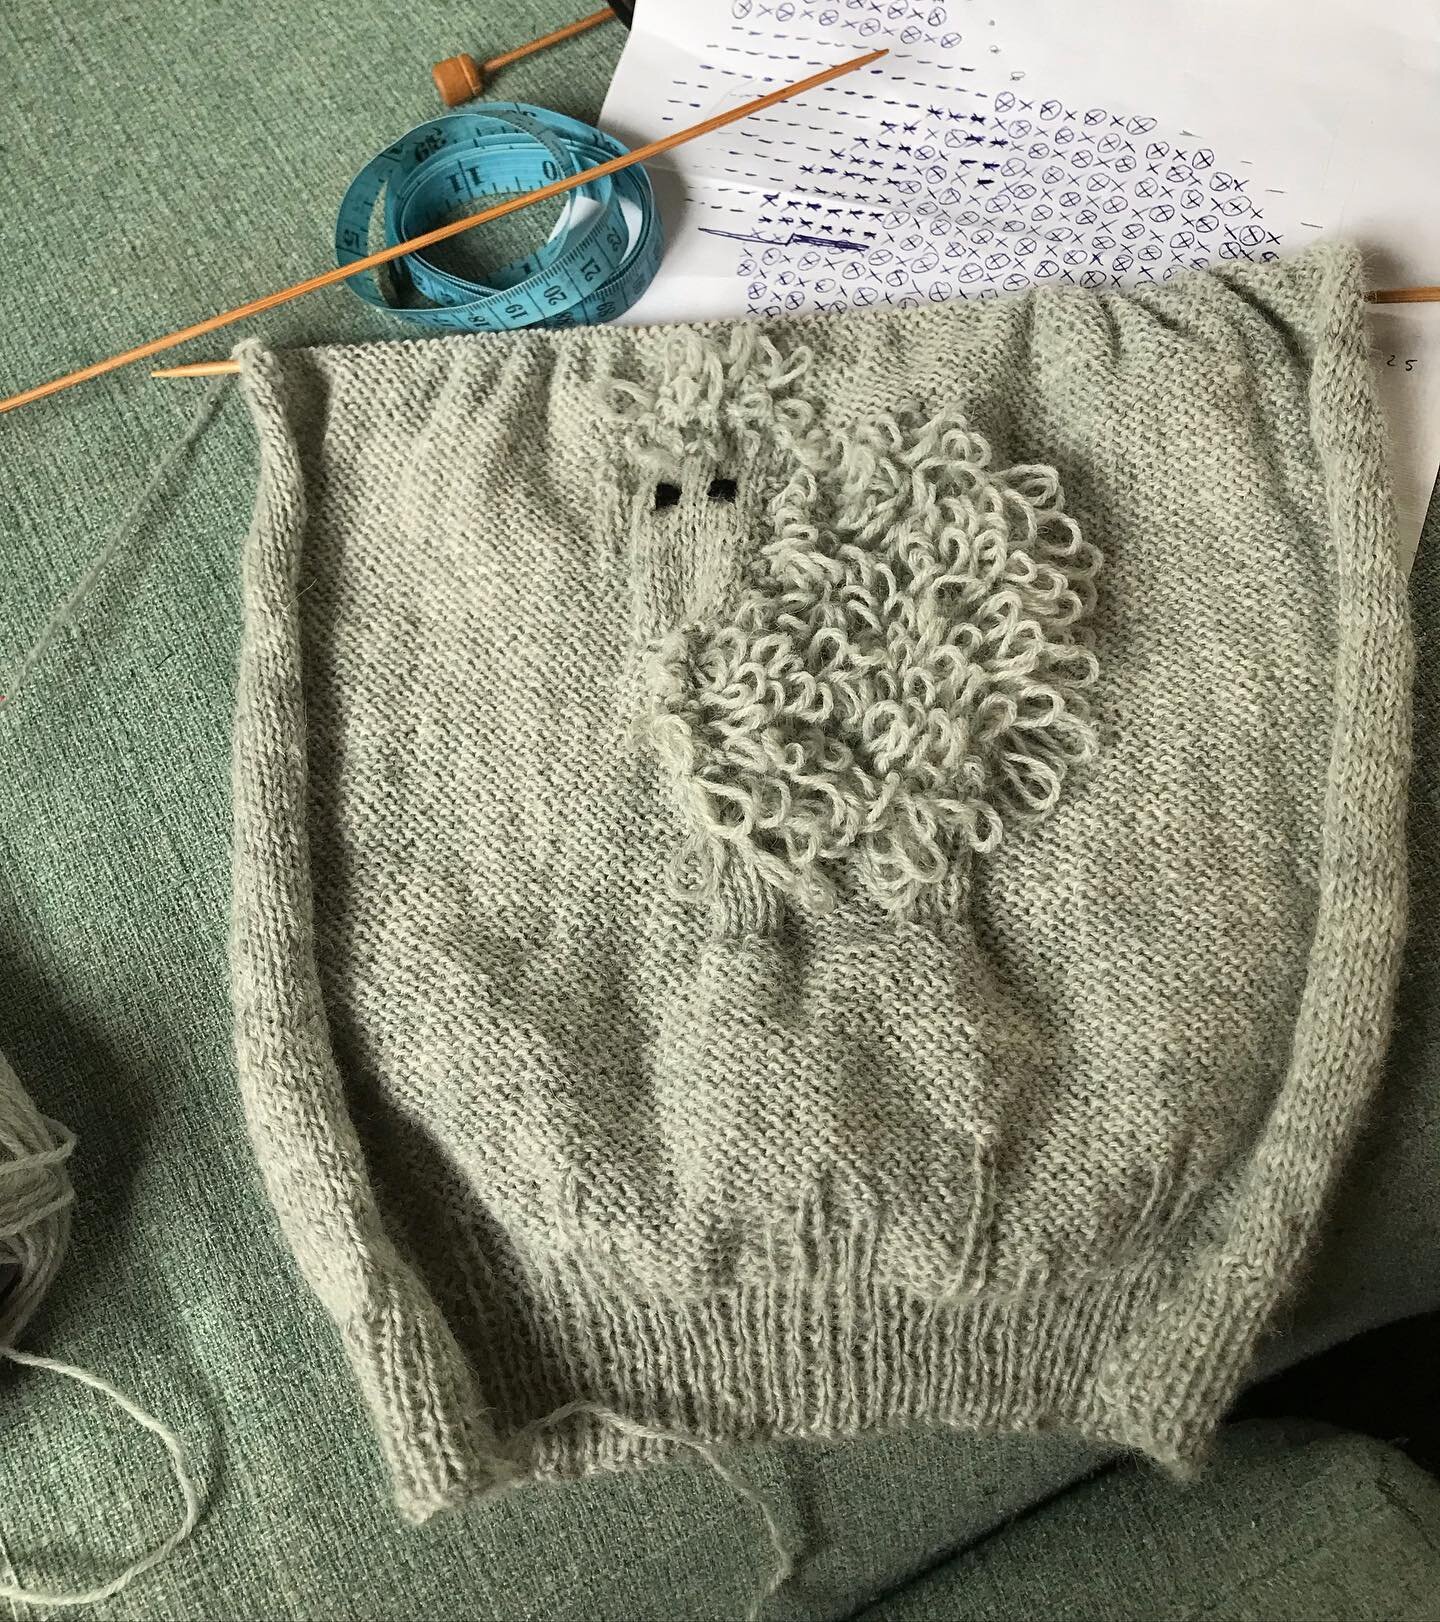 I&rsquo;m working on a new project. Guess what it is!  Now I have to work on the instructions!

#baby #gift #lamb #sheep #wool #natural #animals #farm #farmanimals #knitting #crochet #meditation #zen #fun #giftideas #handmade #handmadewithlove #memad